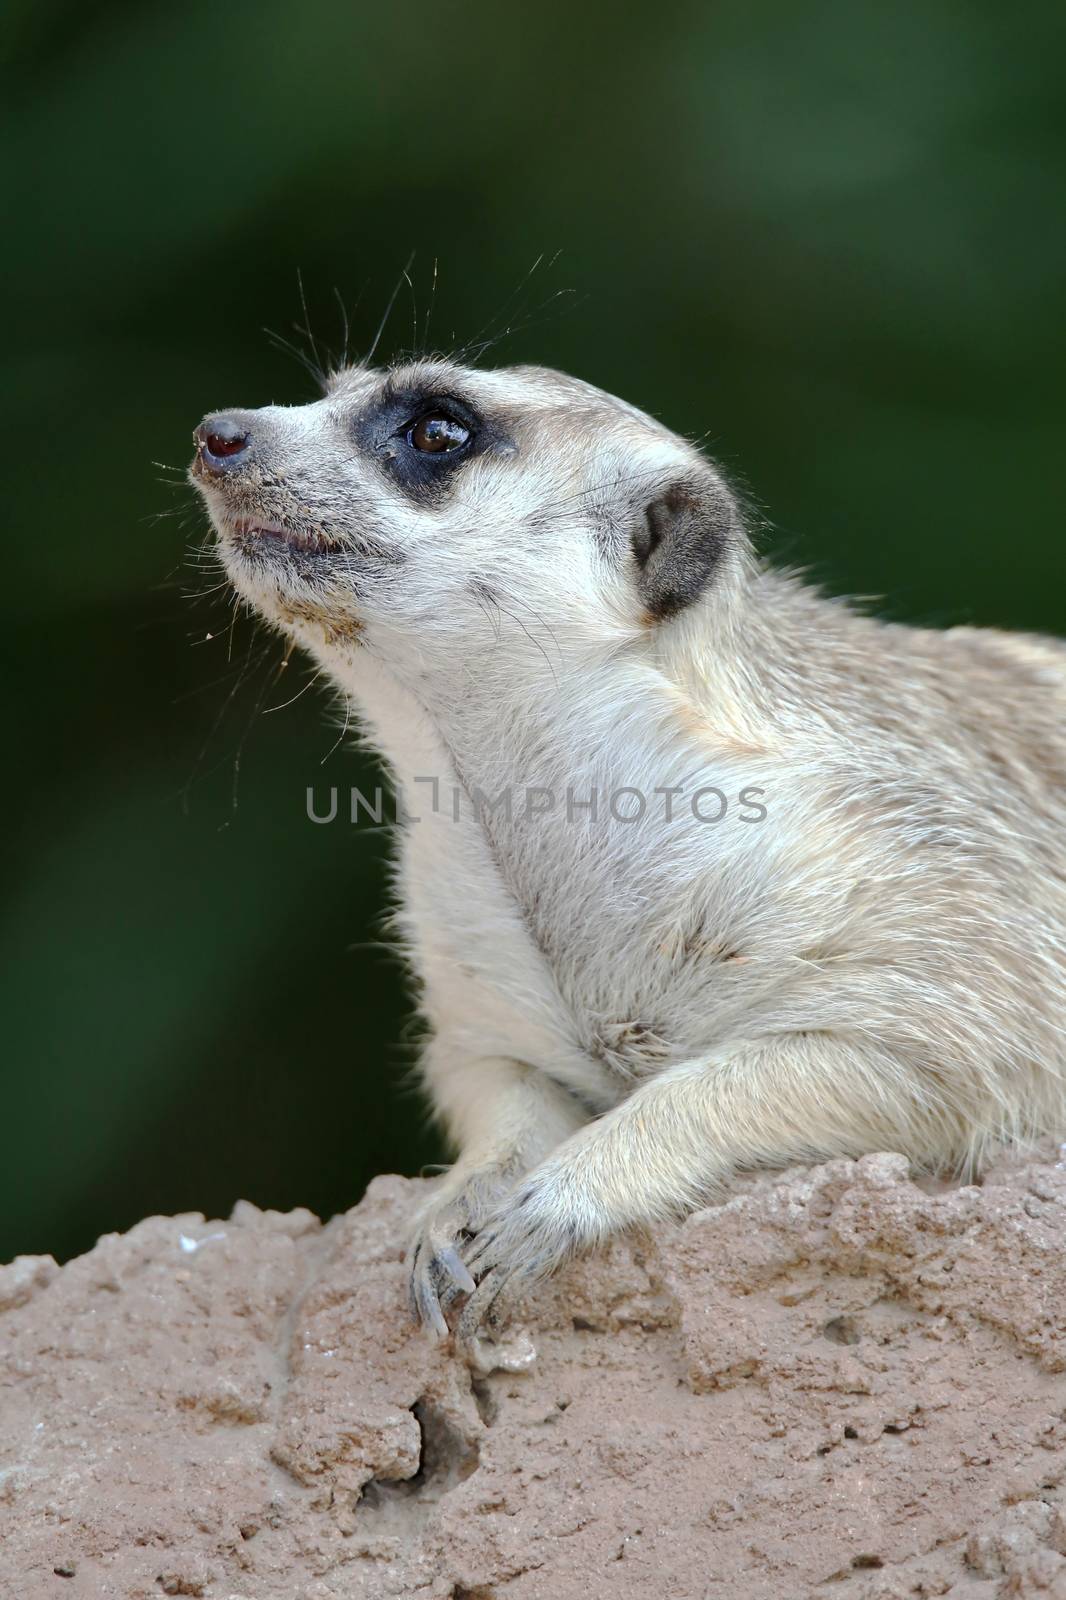 Cute meerkat with alert expression resting on a rock